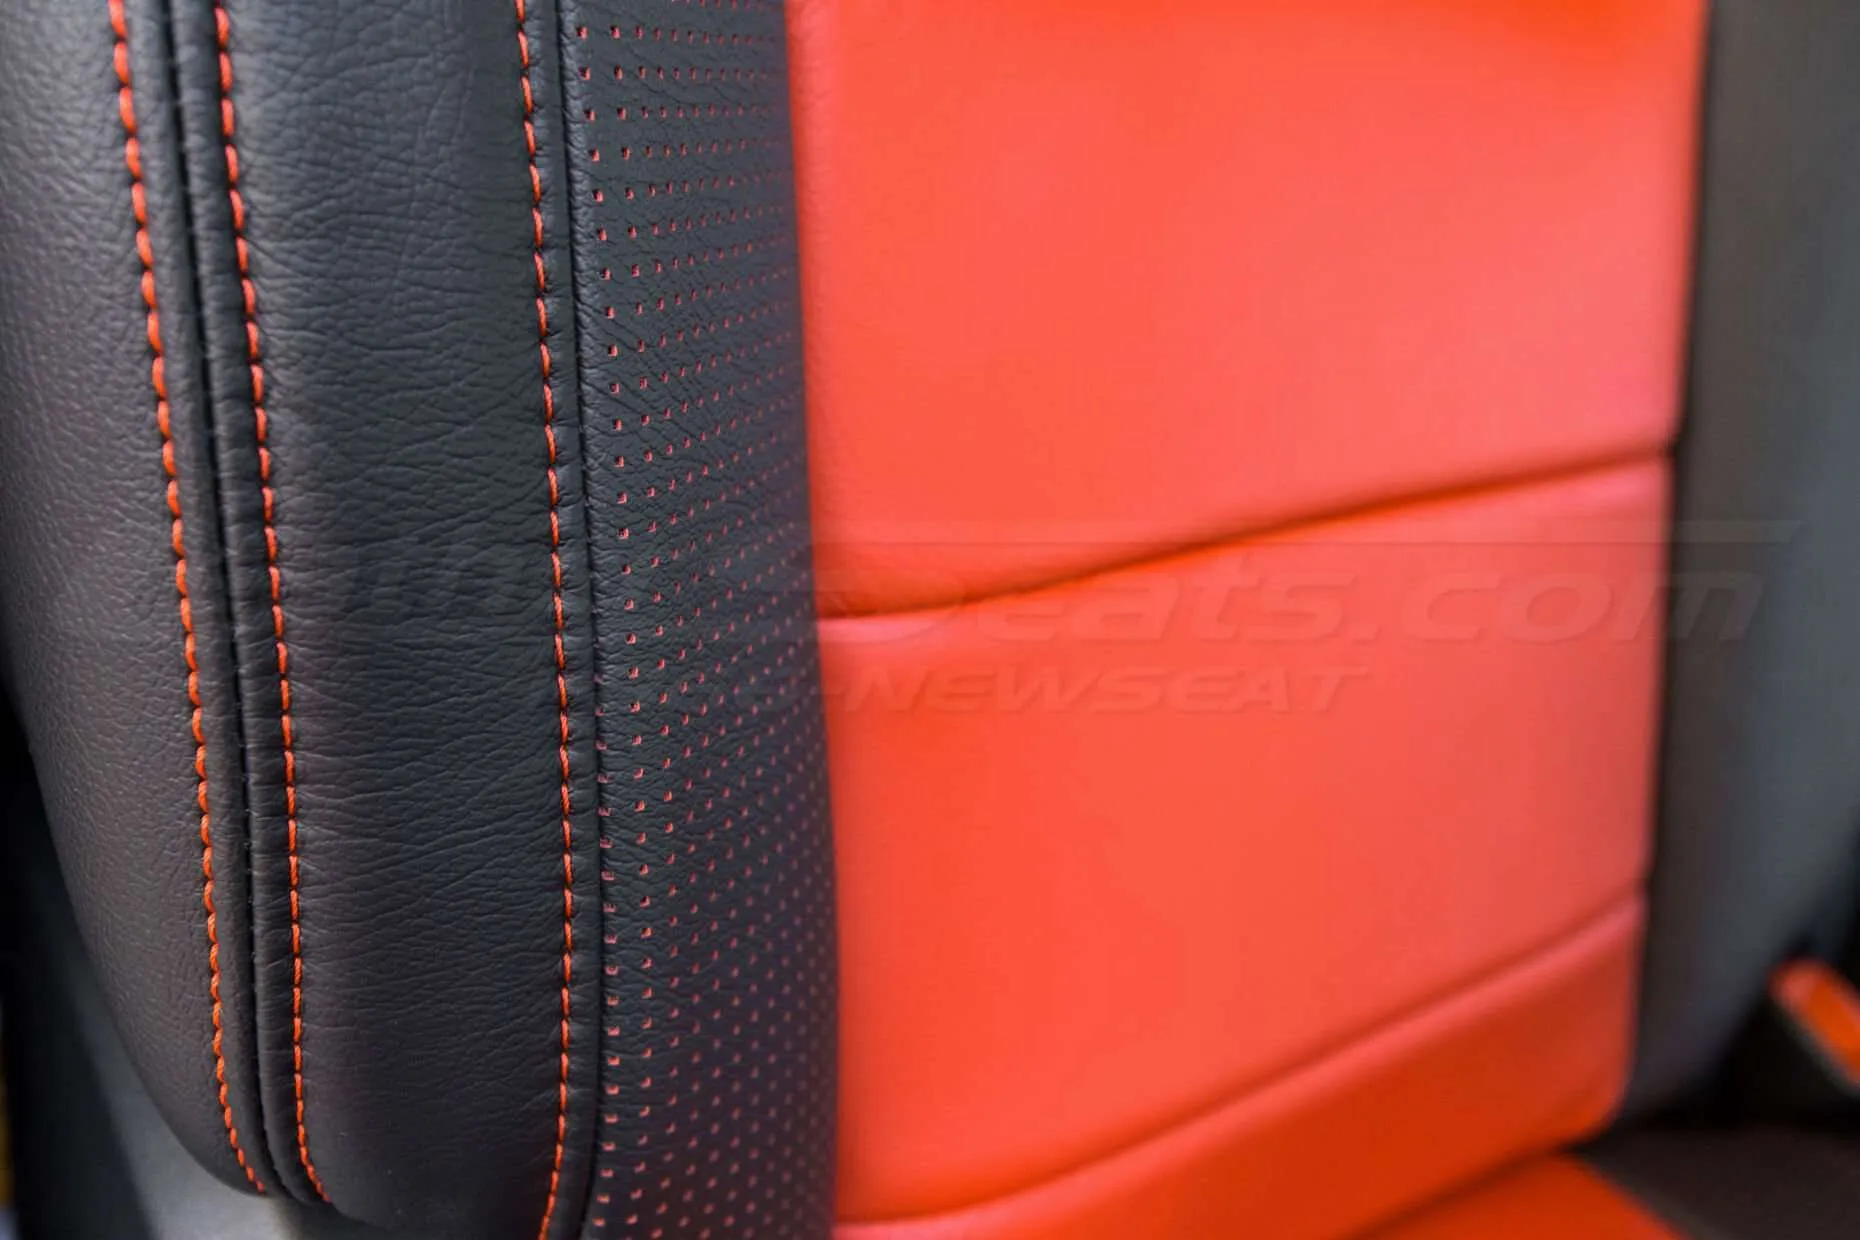 Toyota Tundra Leather Kit Installed - Black & Bright Red - Front backrest double-stitching